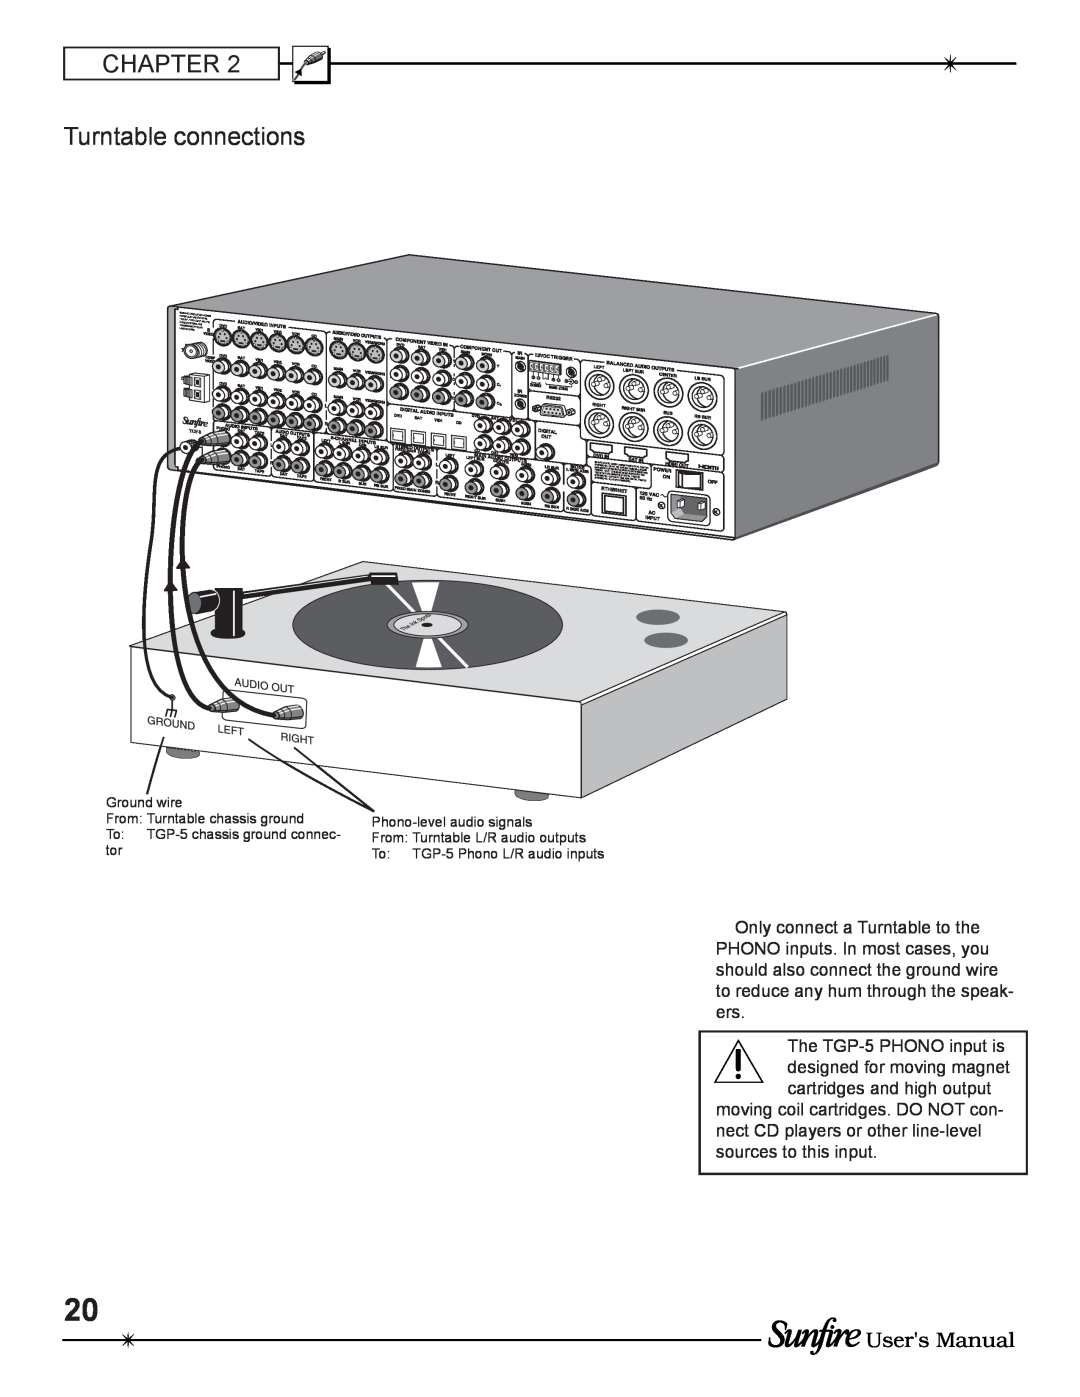 Sunfire TGP-5(E) manual CHAPTER Turntable connections, Users Manual, Ground wire From: Turntable chassis ground 